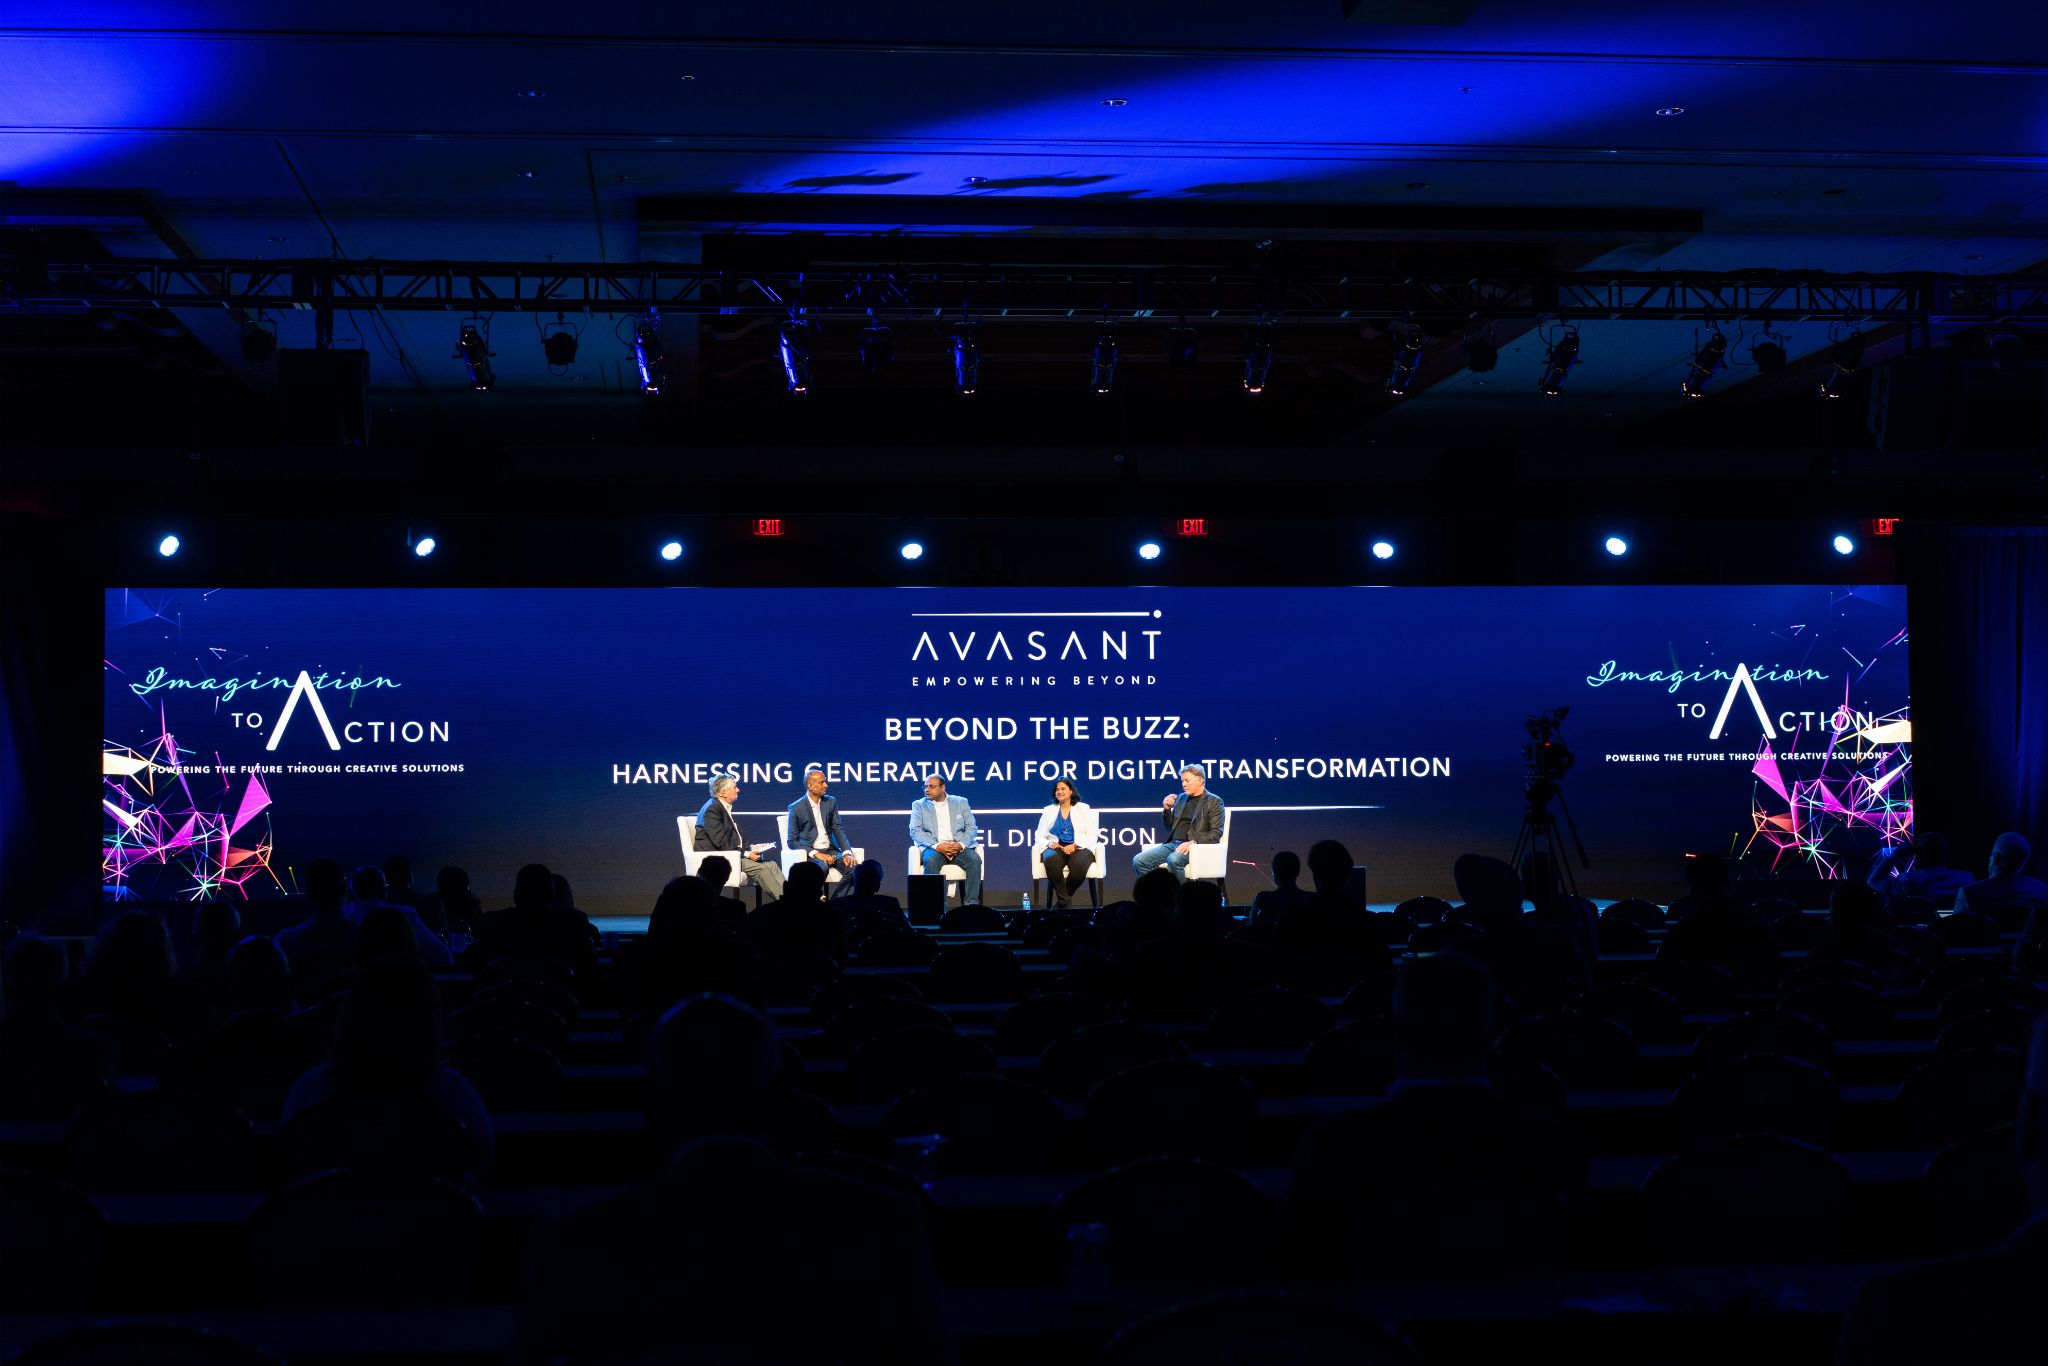 Avasant Empowering Beyond Generative AI Panel with Shilpi Agarwal